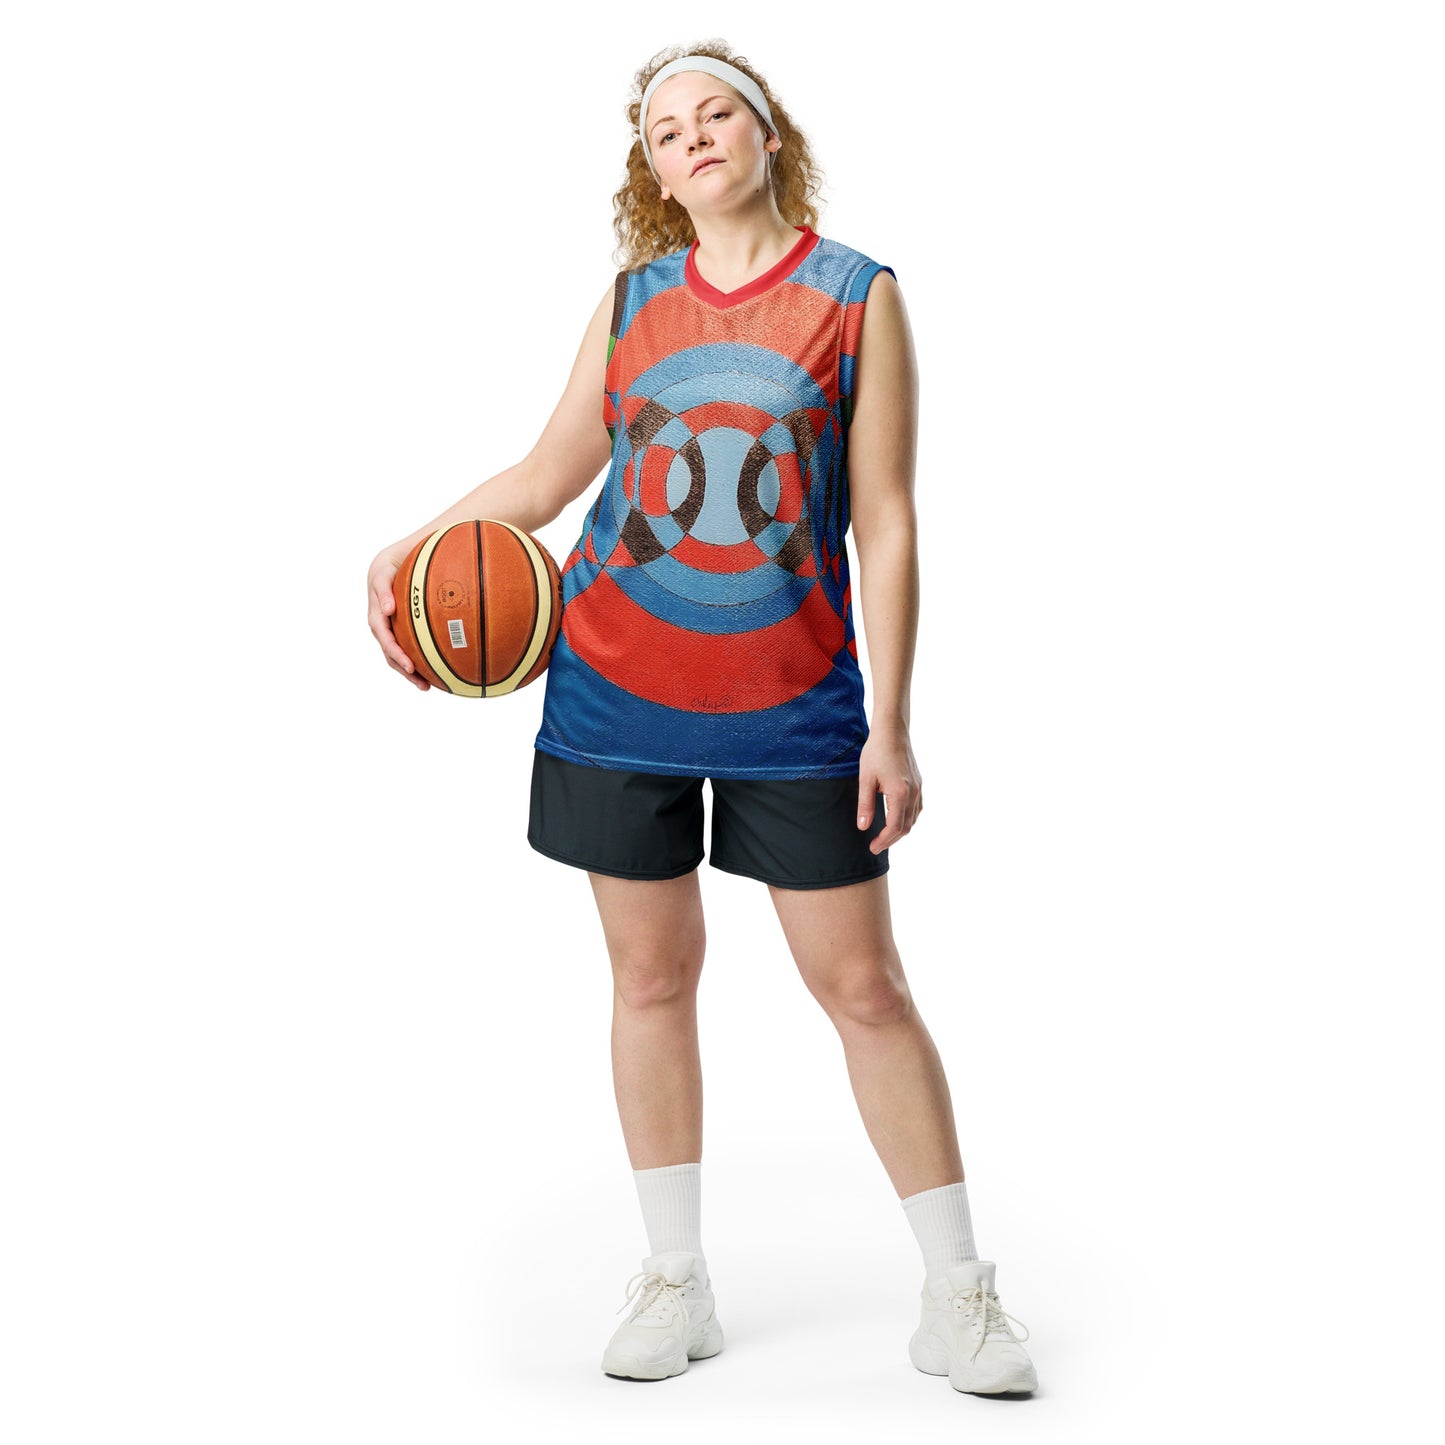 Never-ending Circles Recycled unisex basketball jersey